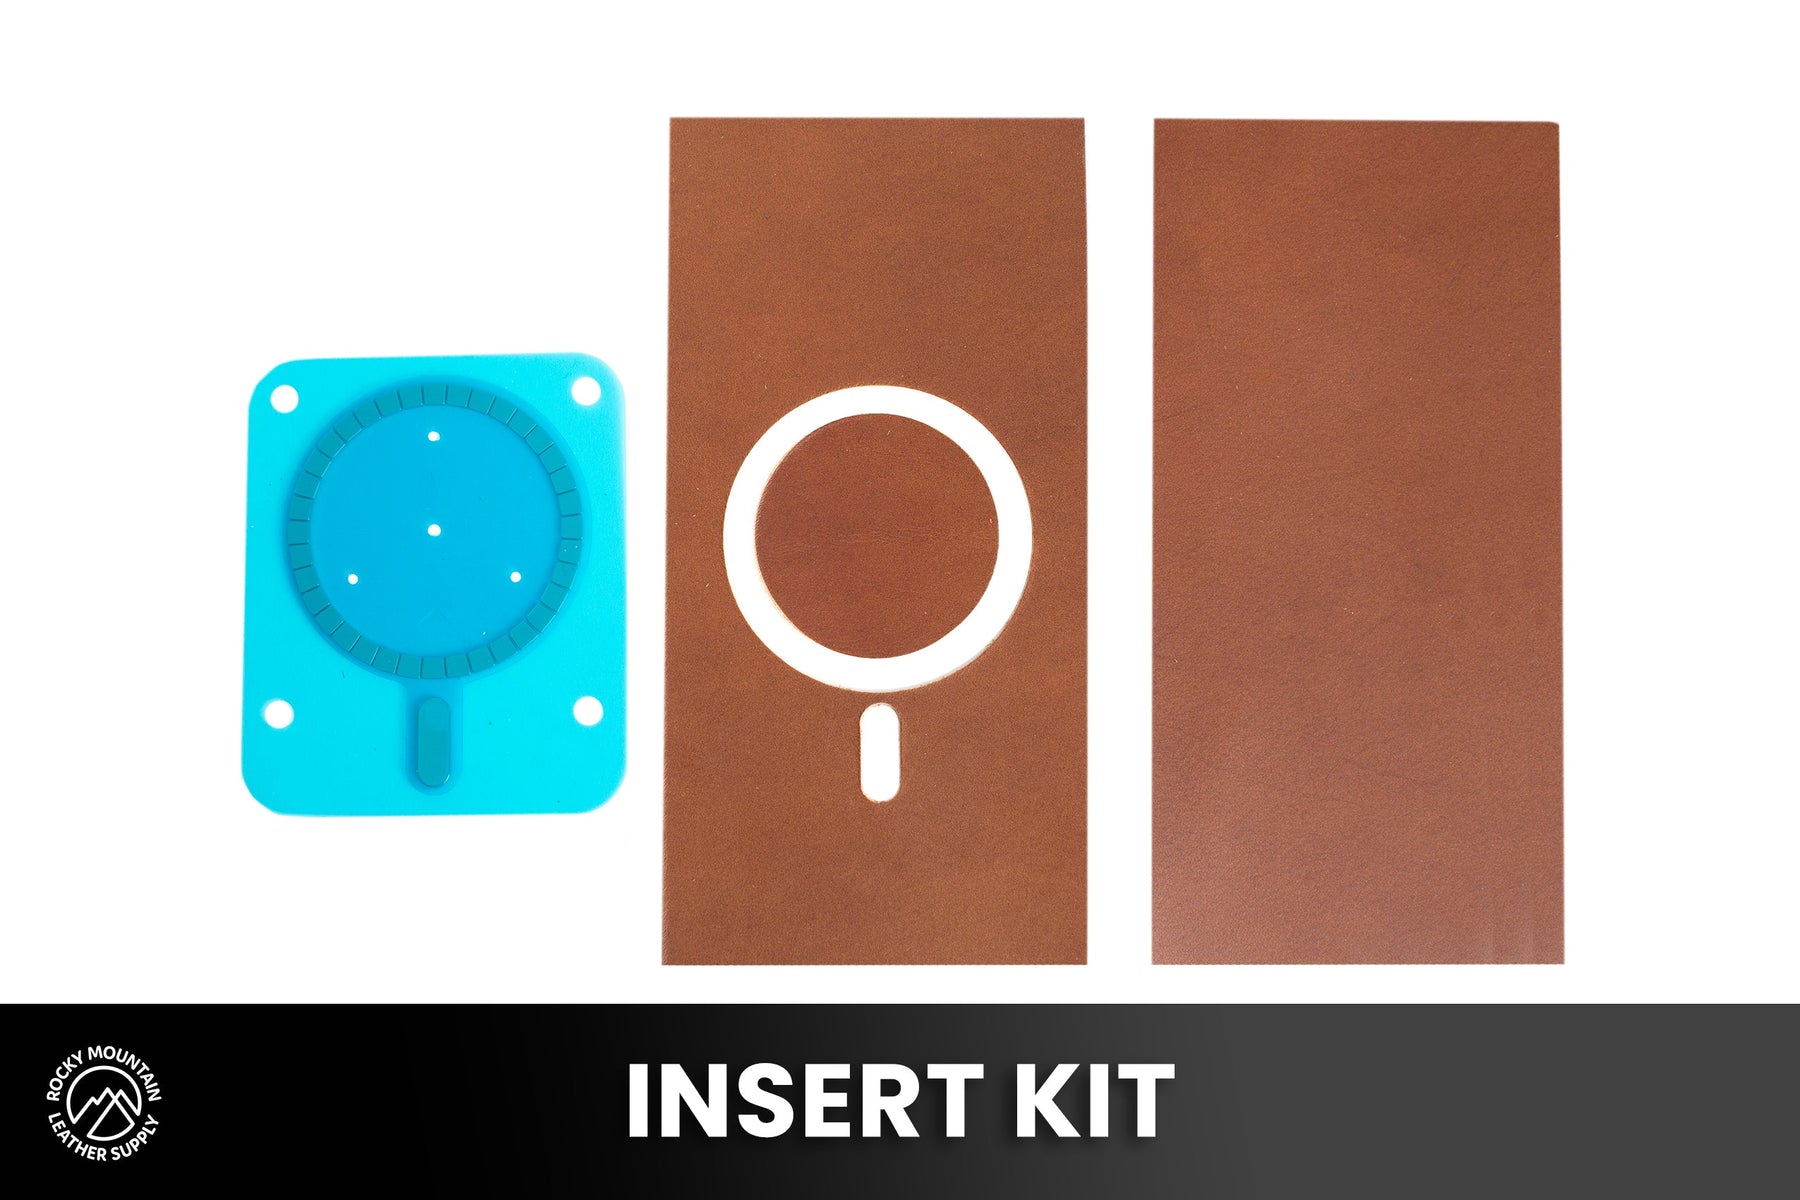 iPhone Magsafe Hardware & Insert Kits - Attach leather products to iPhone!